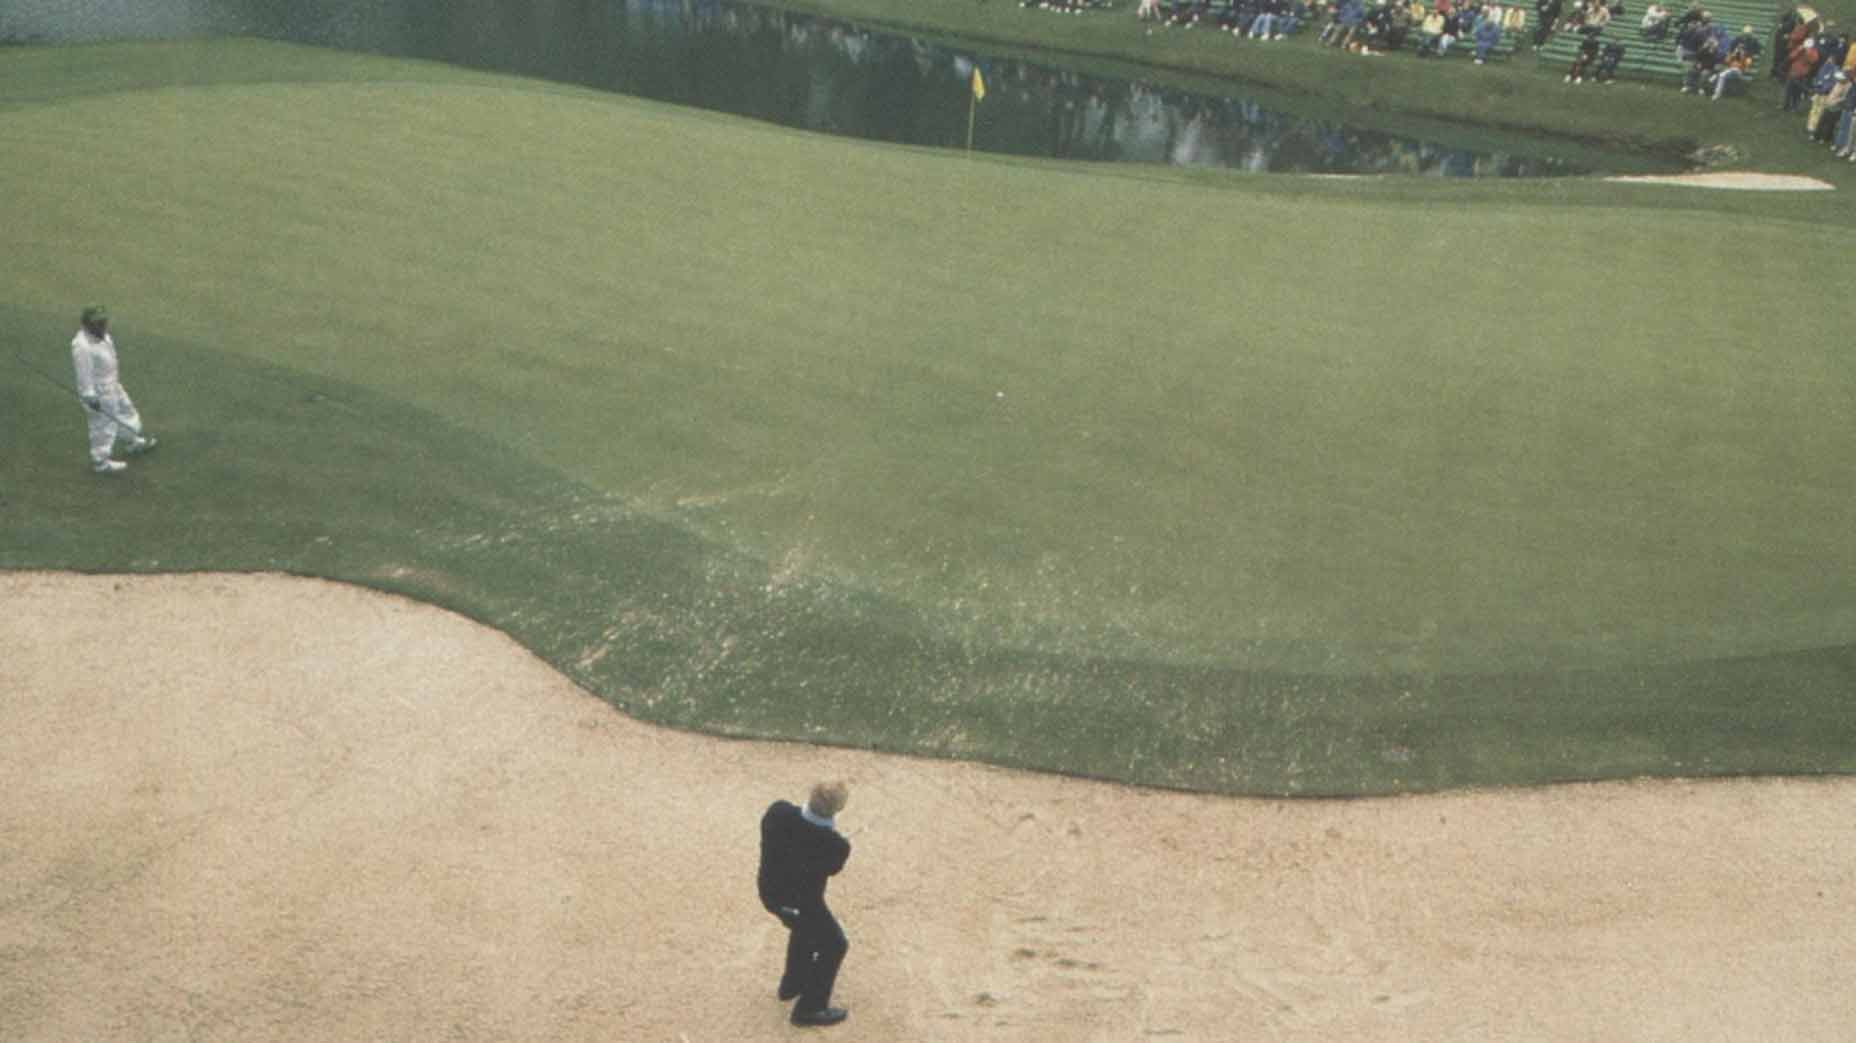 arnold palmer hits a bunker shot from behind the 16th green